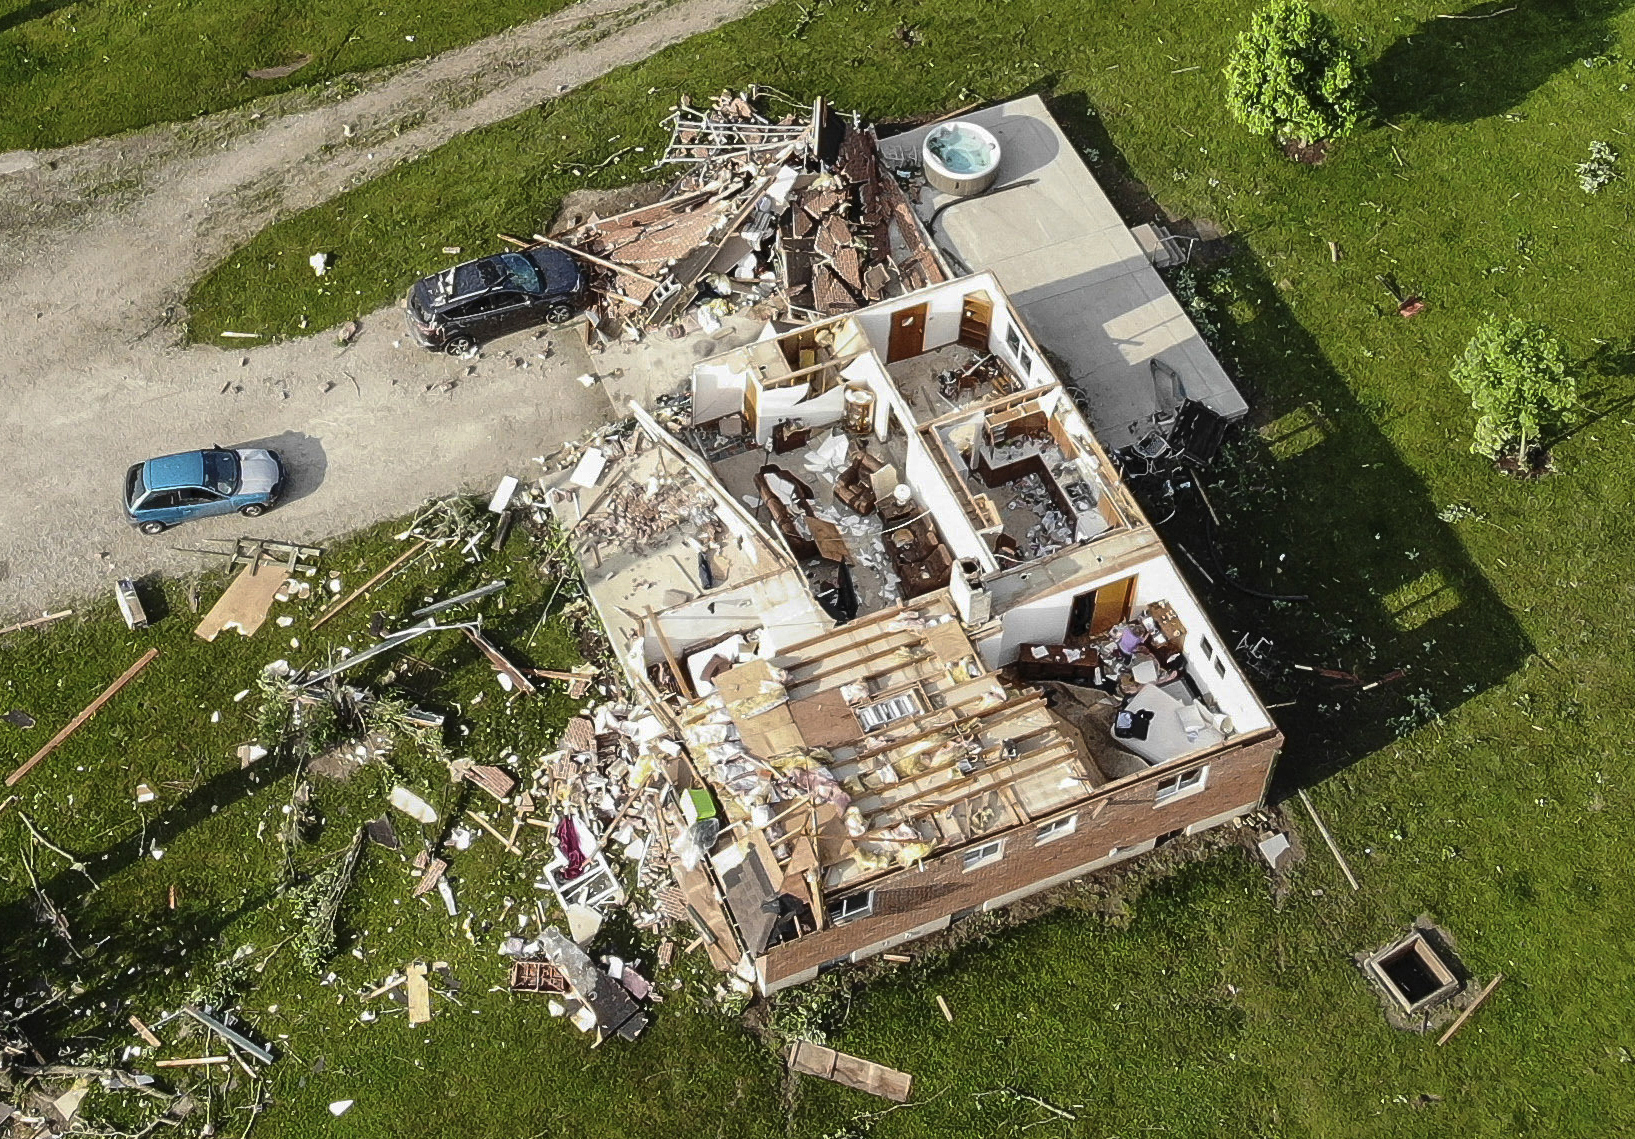 PHOTO: Storm damaged homes remain after a tornado passed through the area the previous evening, May 28, 2019, in Brookville, Ohio.